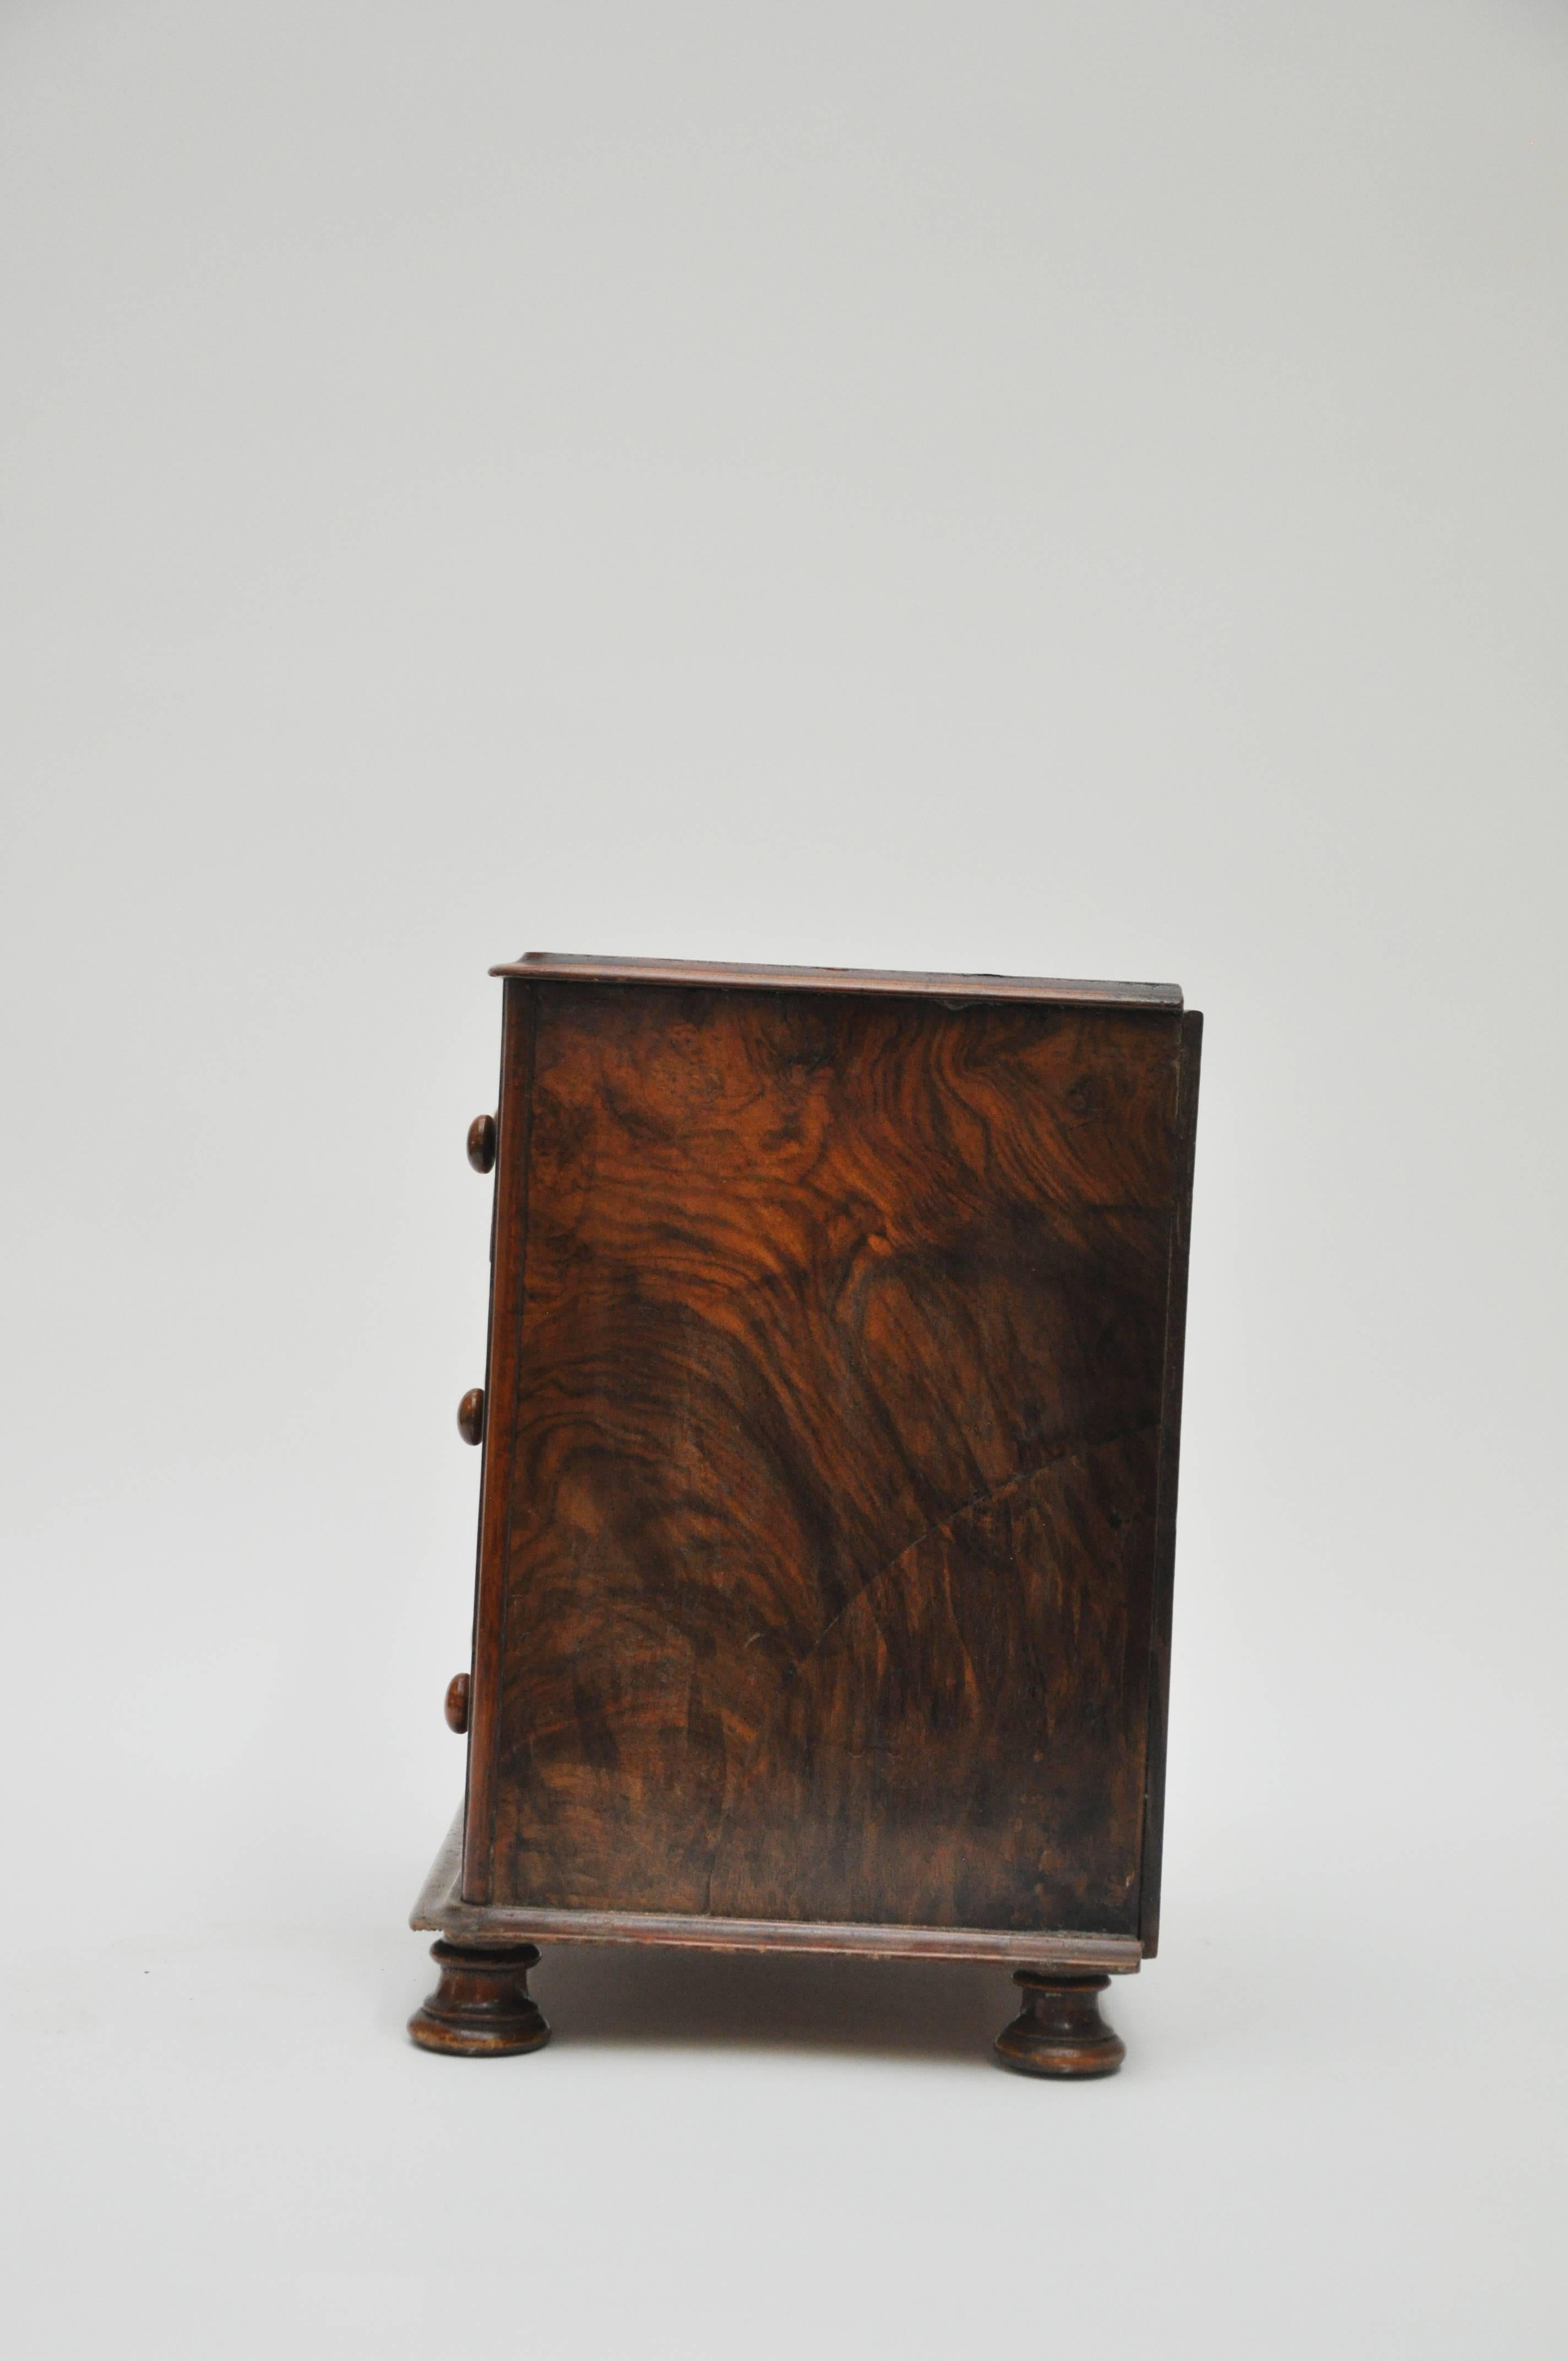 This mahogany burl three-drawer salesman sample chest was used by salesman as a visual aid to help make sales during the late 1800 and early 1900s.